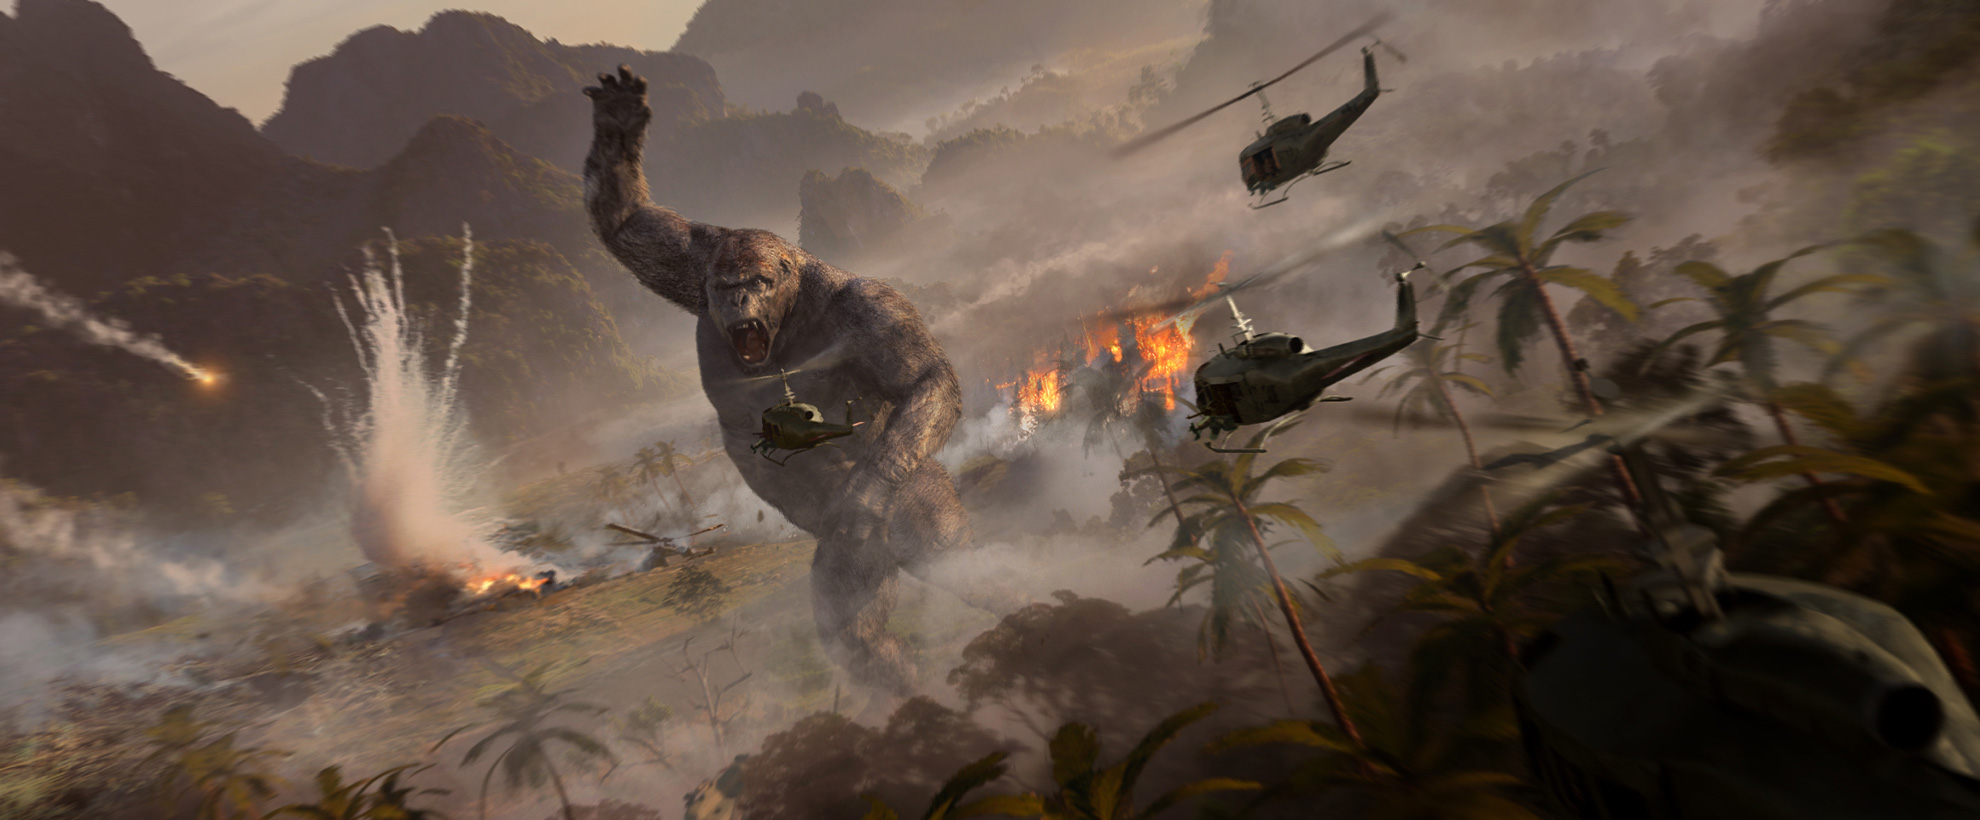 Concept art for Kong fighting off helicopters